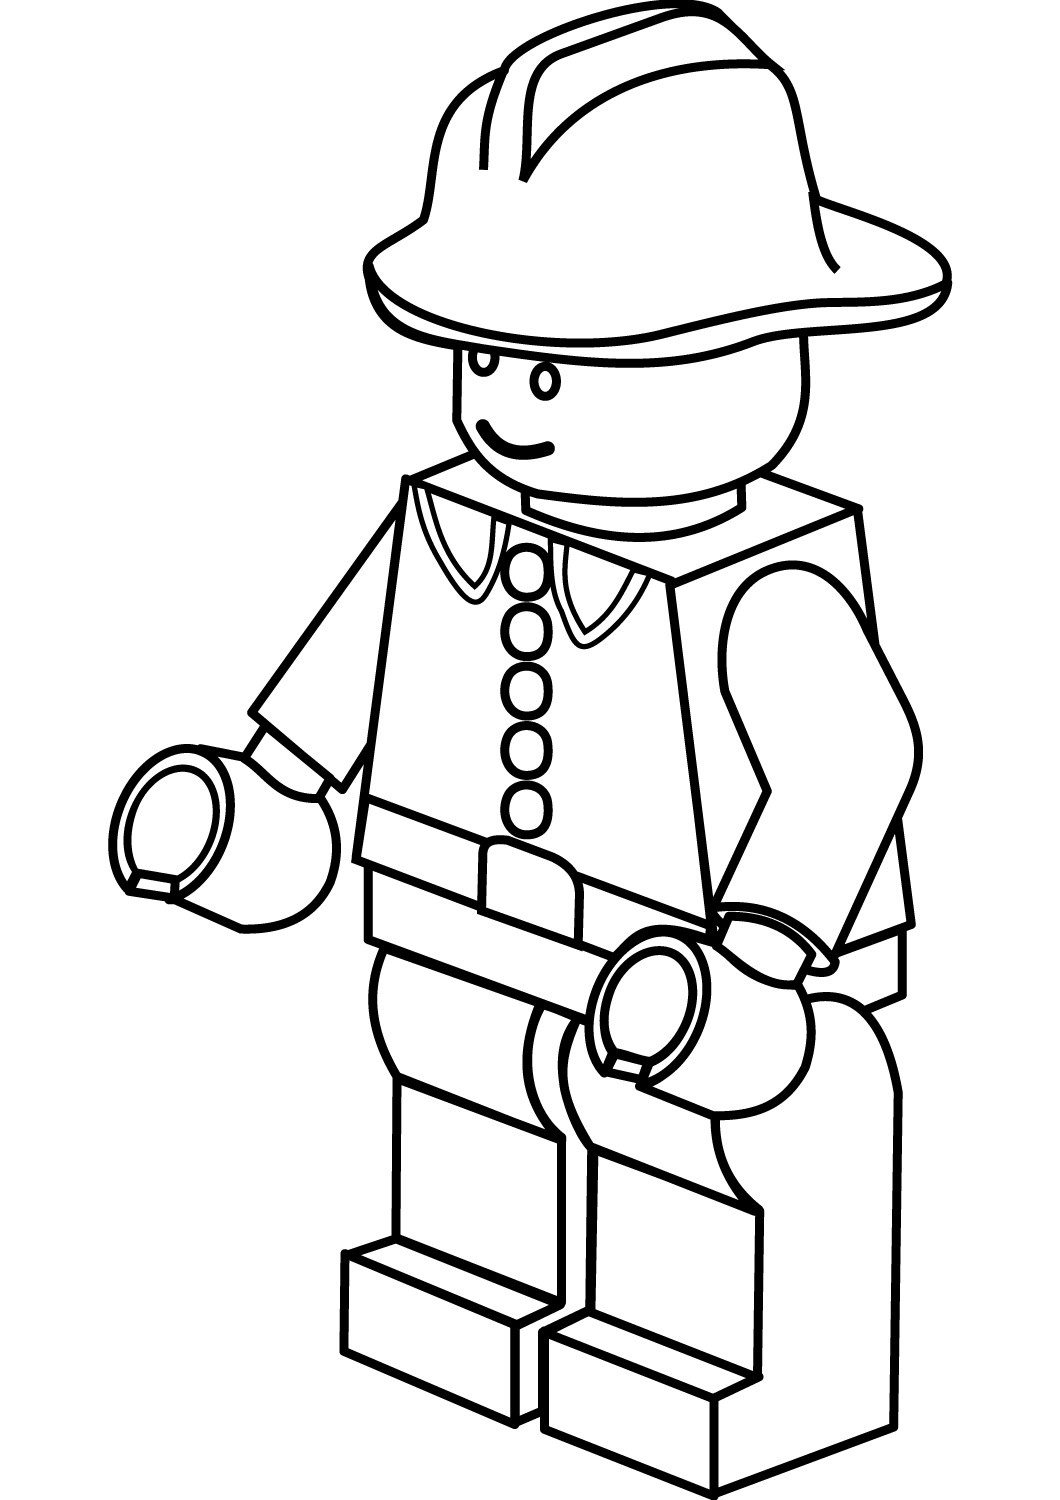 Lego City Firefighter Coloring Page